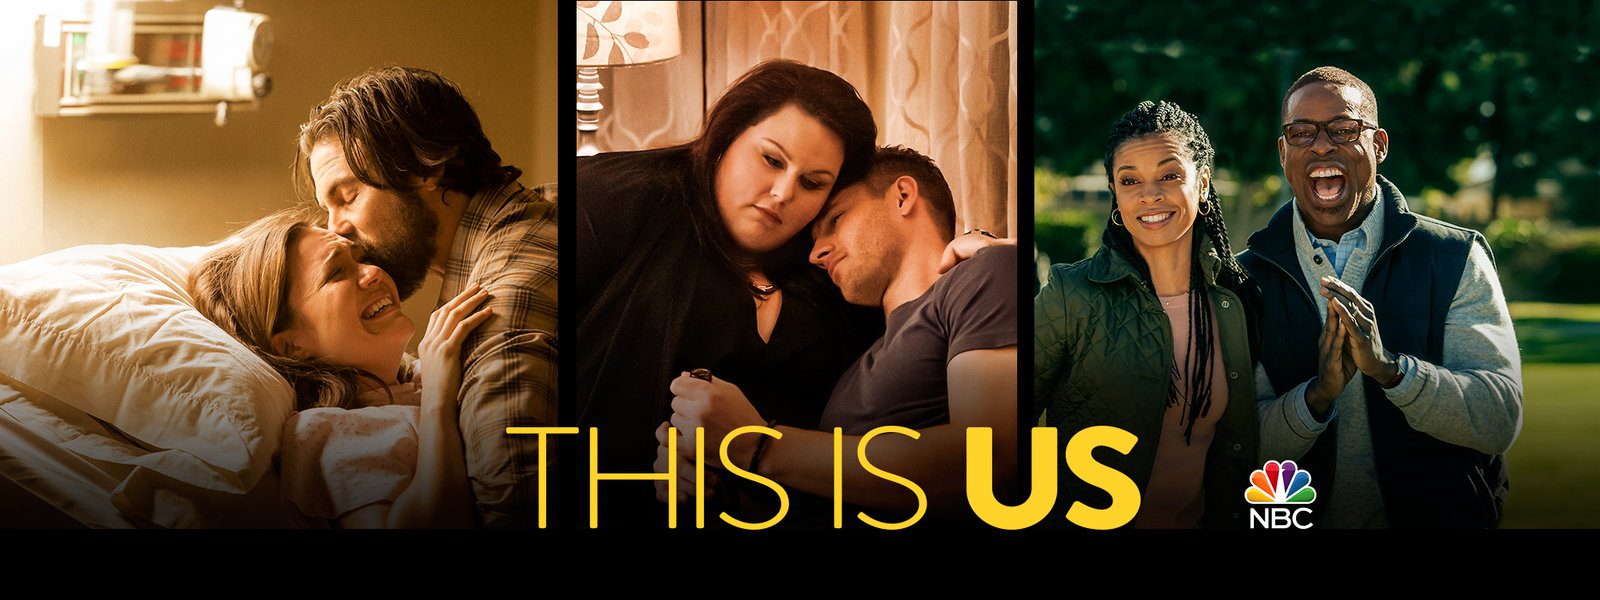 “This is Us” has an Emmy Nomination Revoked.